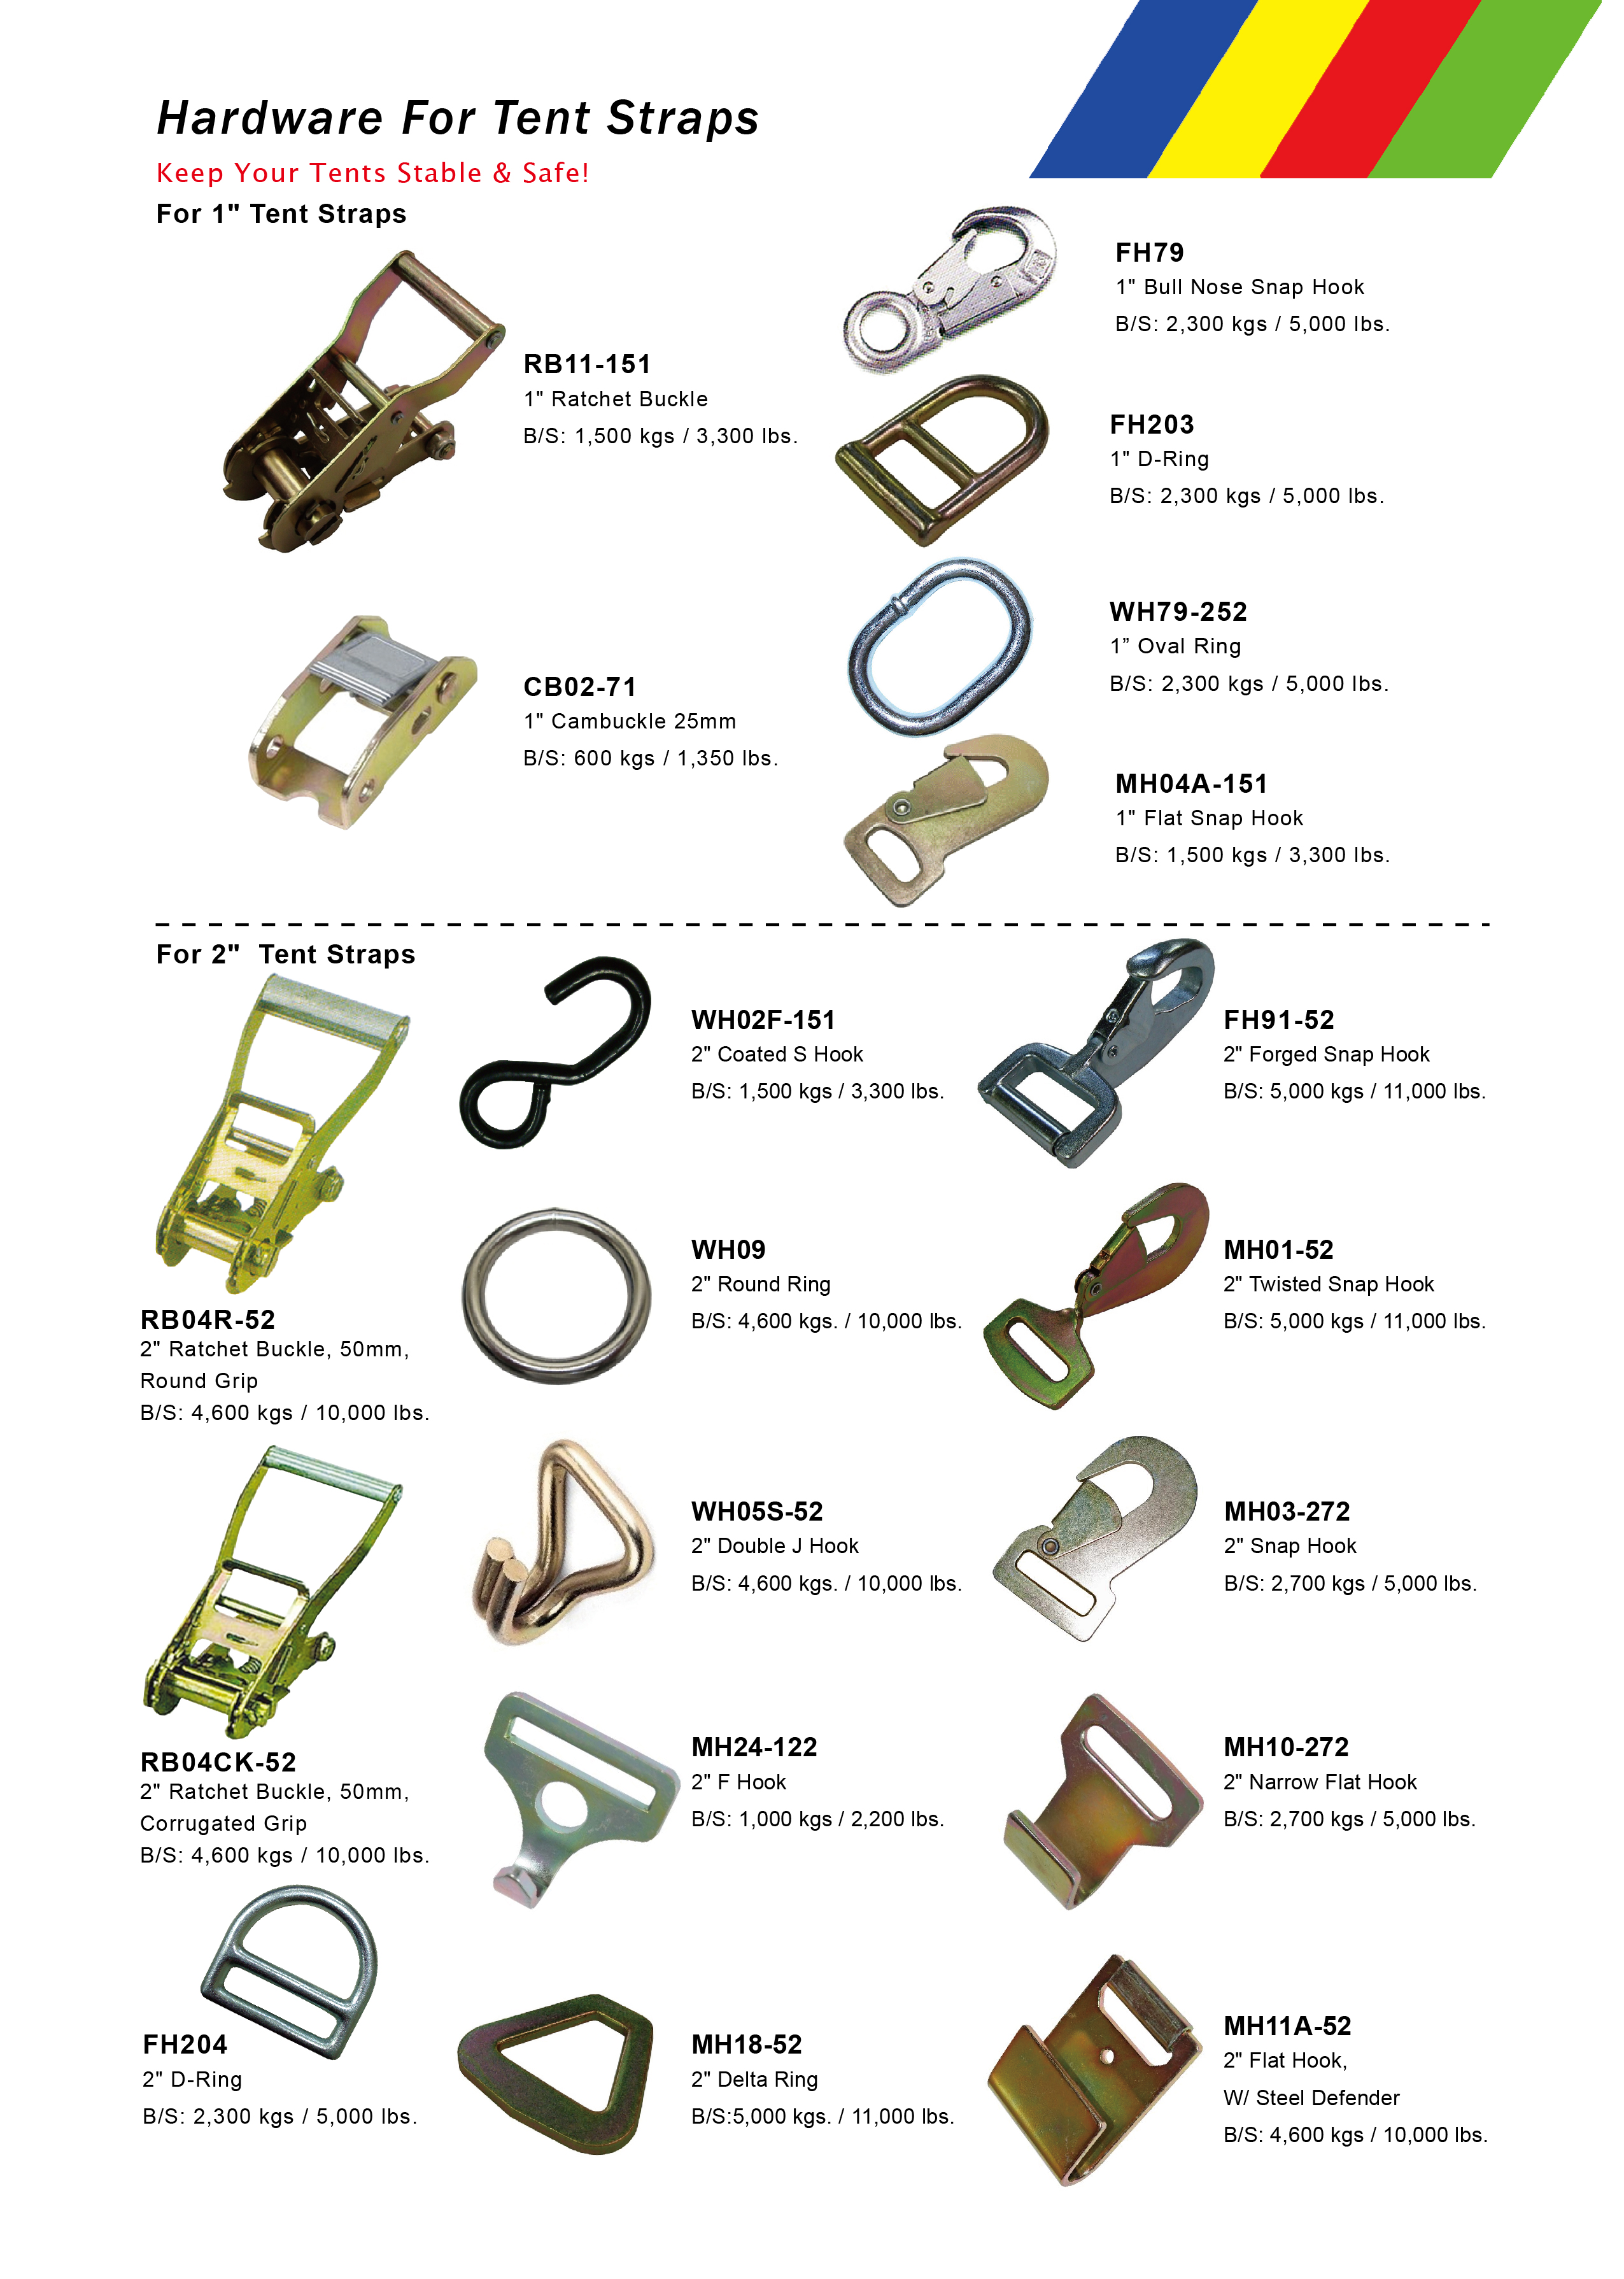 Hardware For Tent Straps